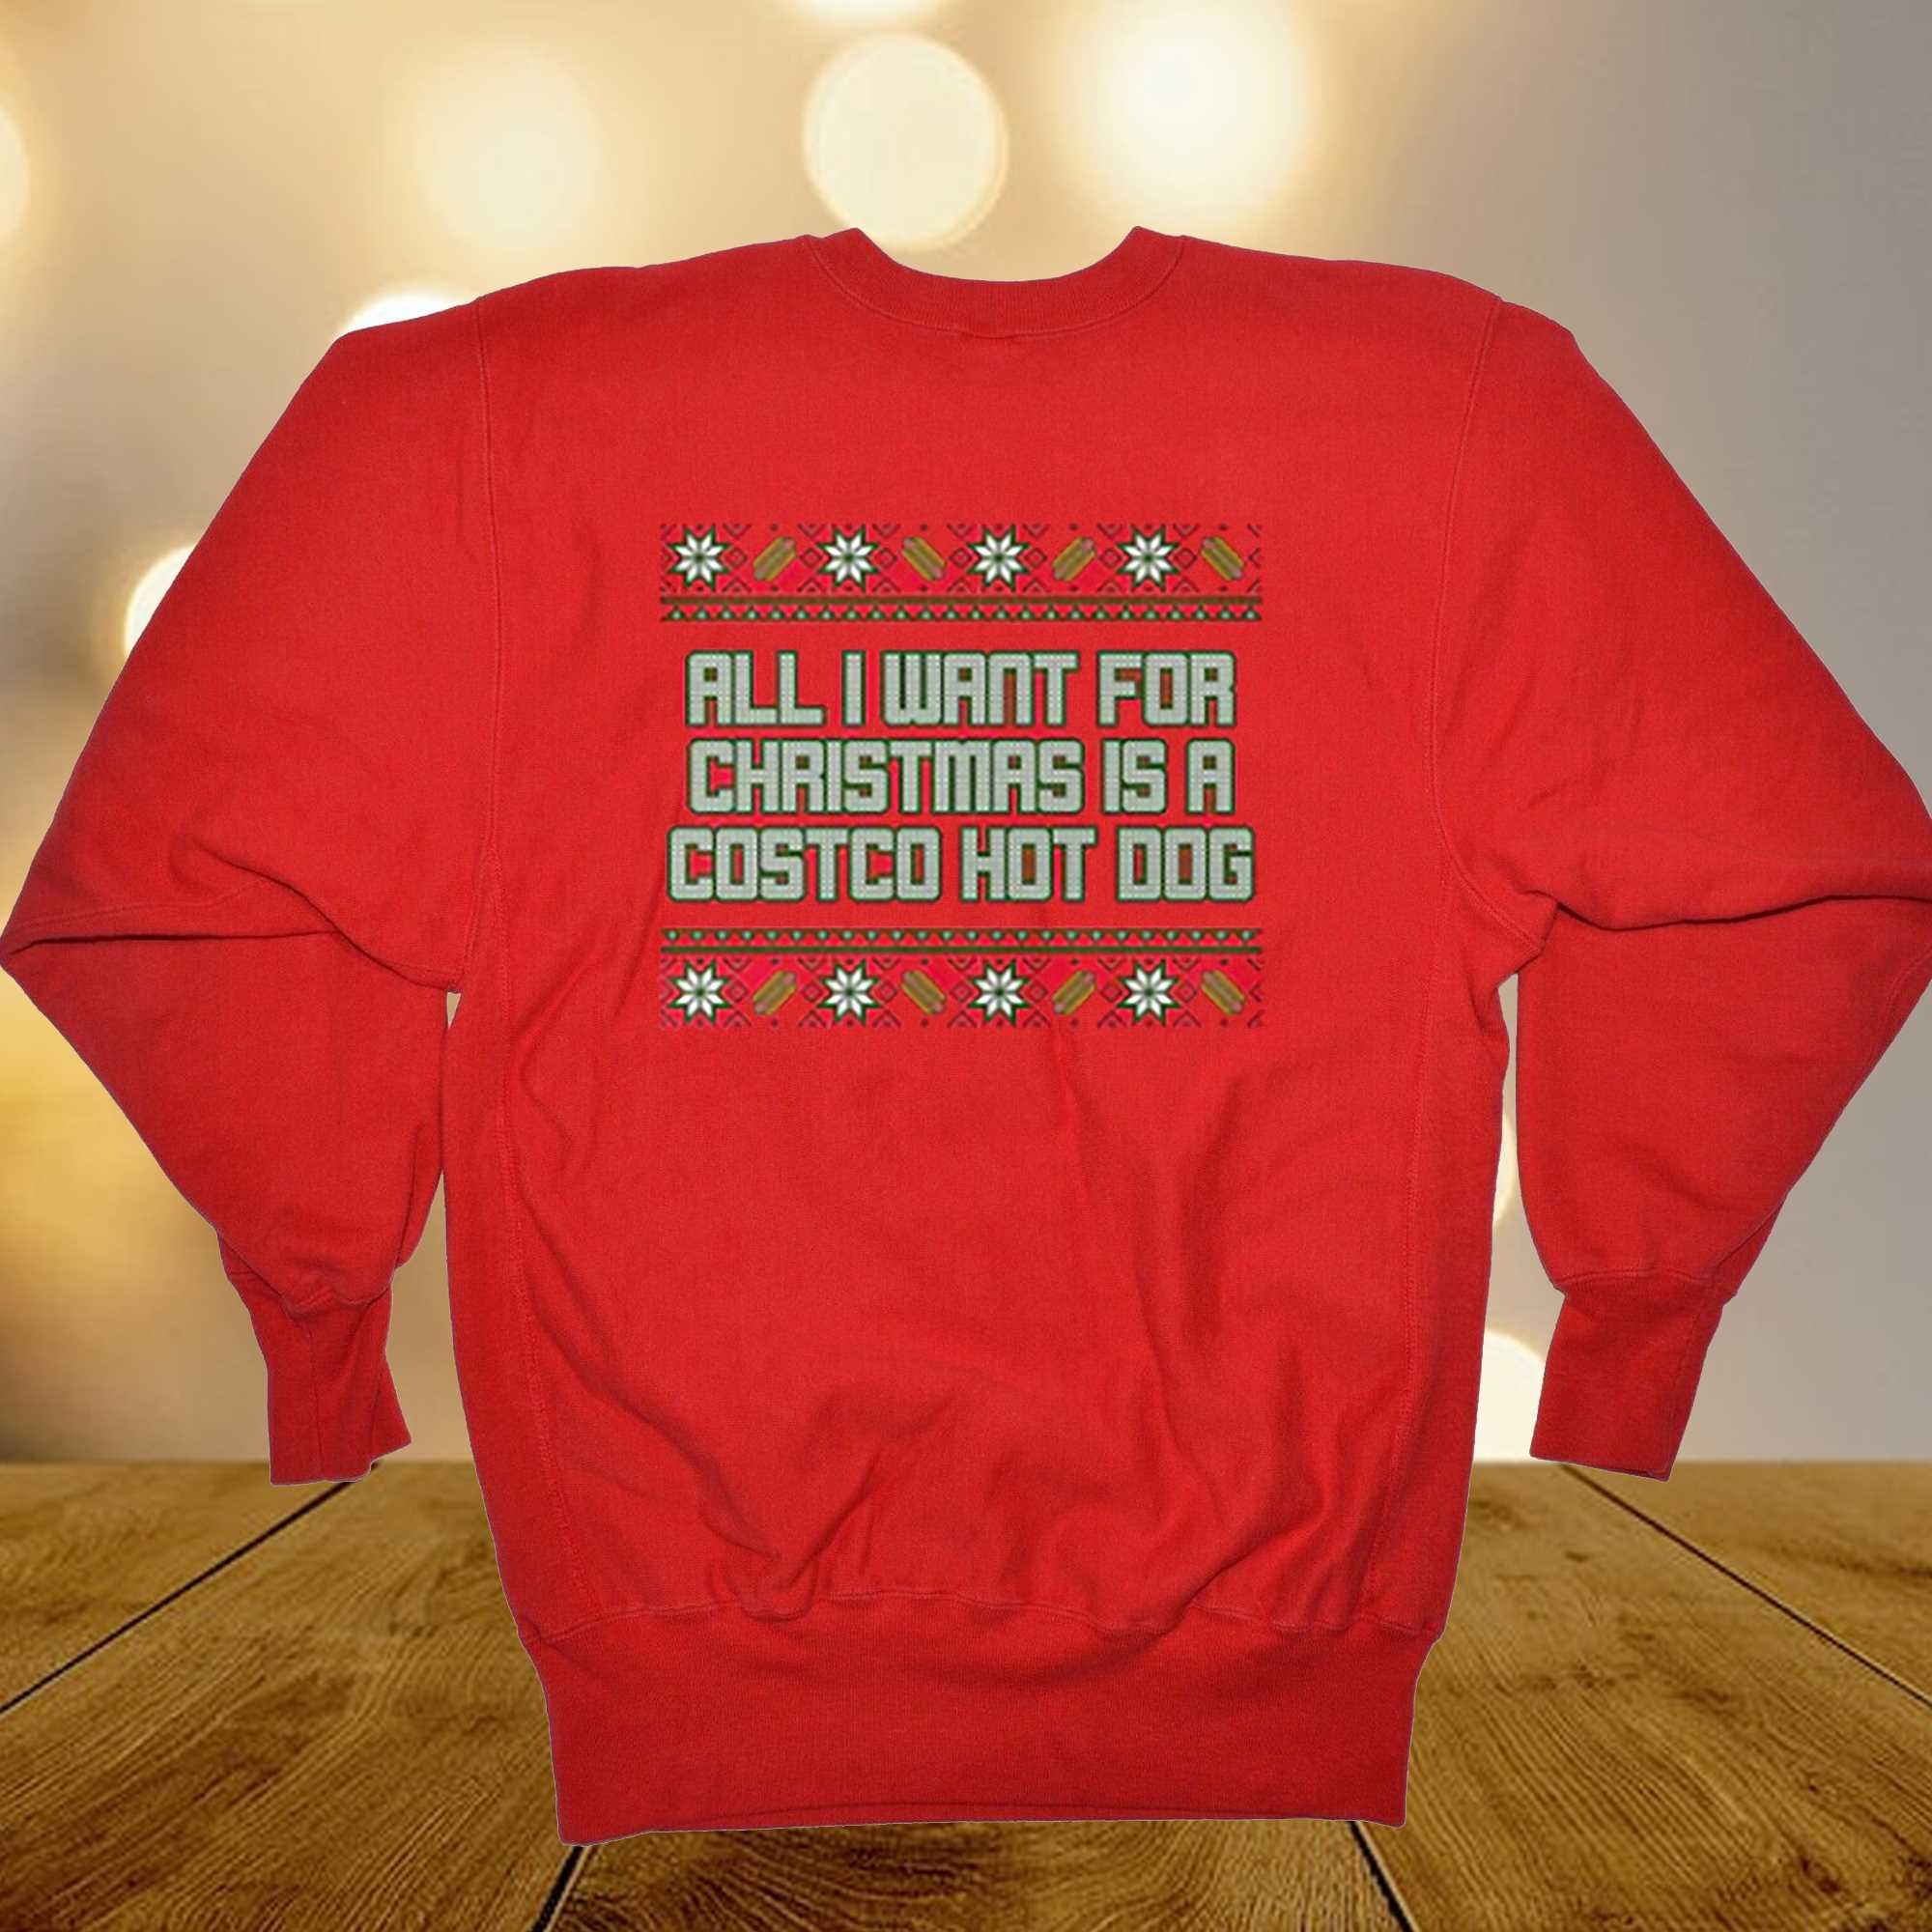 All I Want For Christmas Is A Costco Hot Dog Christmas Sweater ...